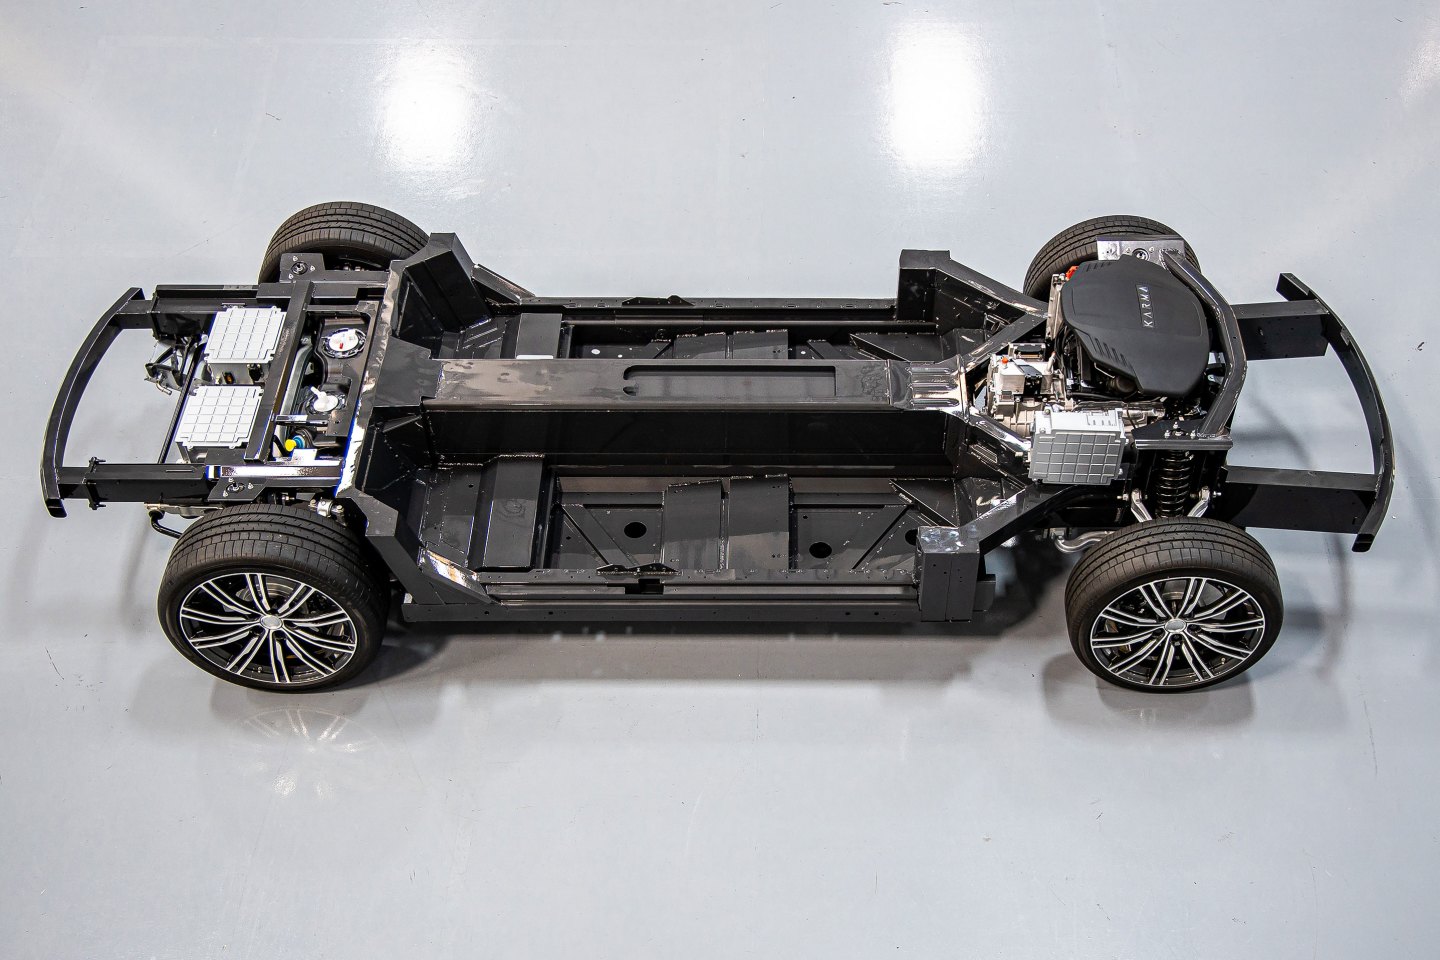 Karma is using the GTE model to showcase the flexibility of its new in-house battery and vehicle platform designs